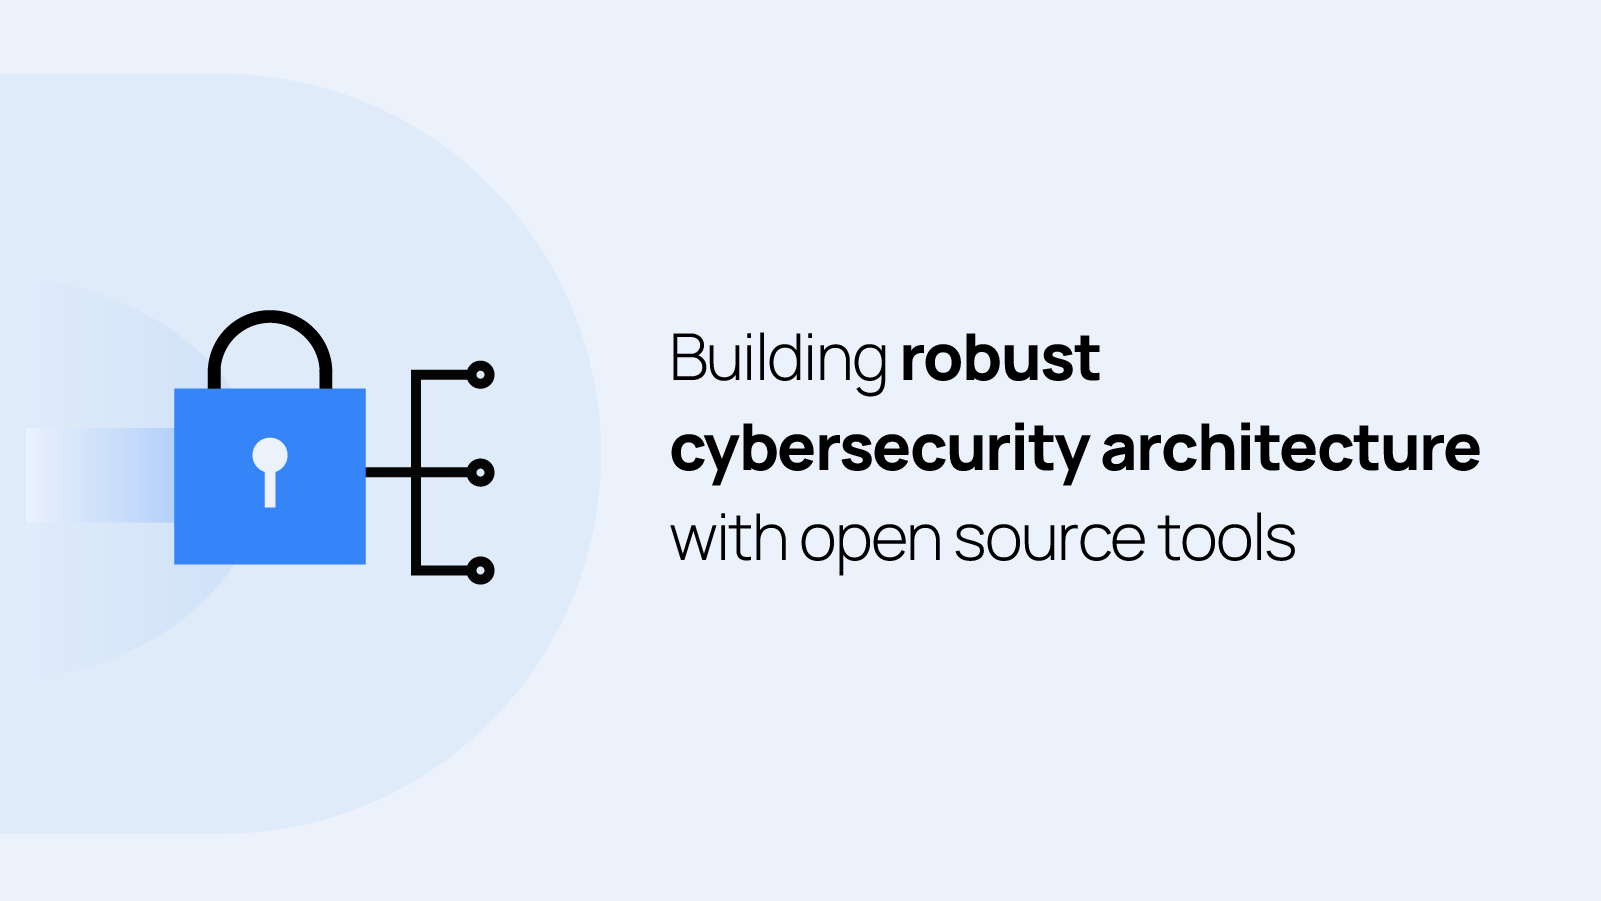 Wazuh: Building robust cybersecurity architecture with open source tools